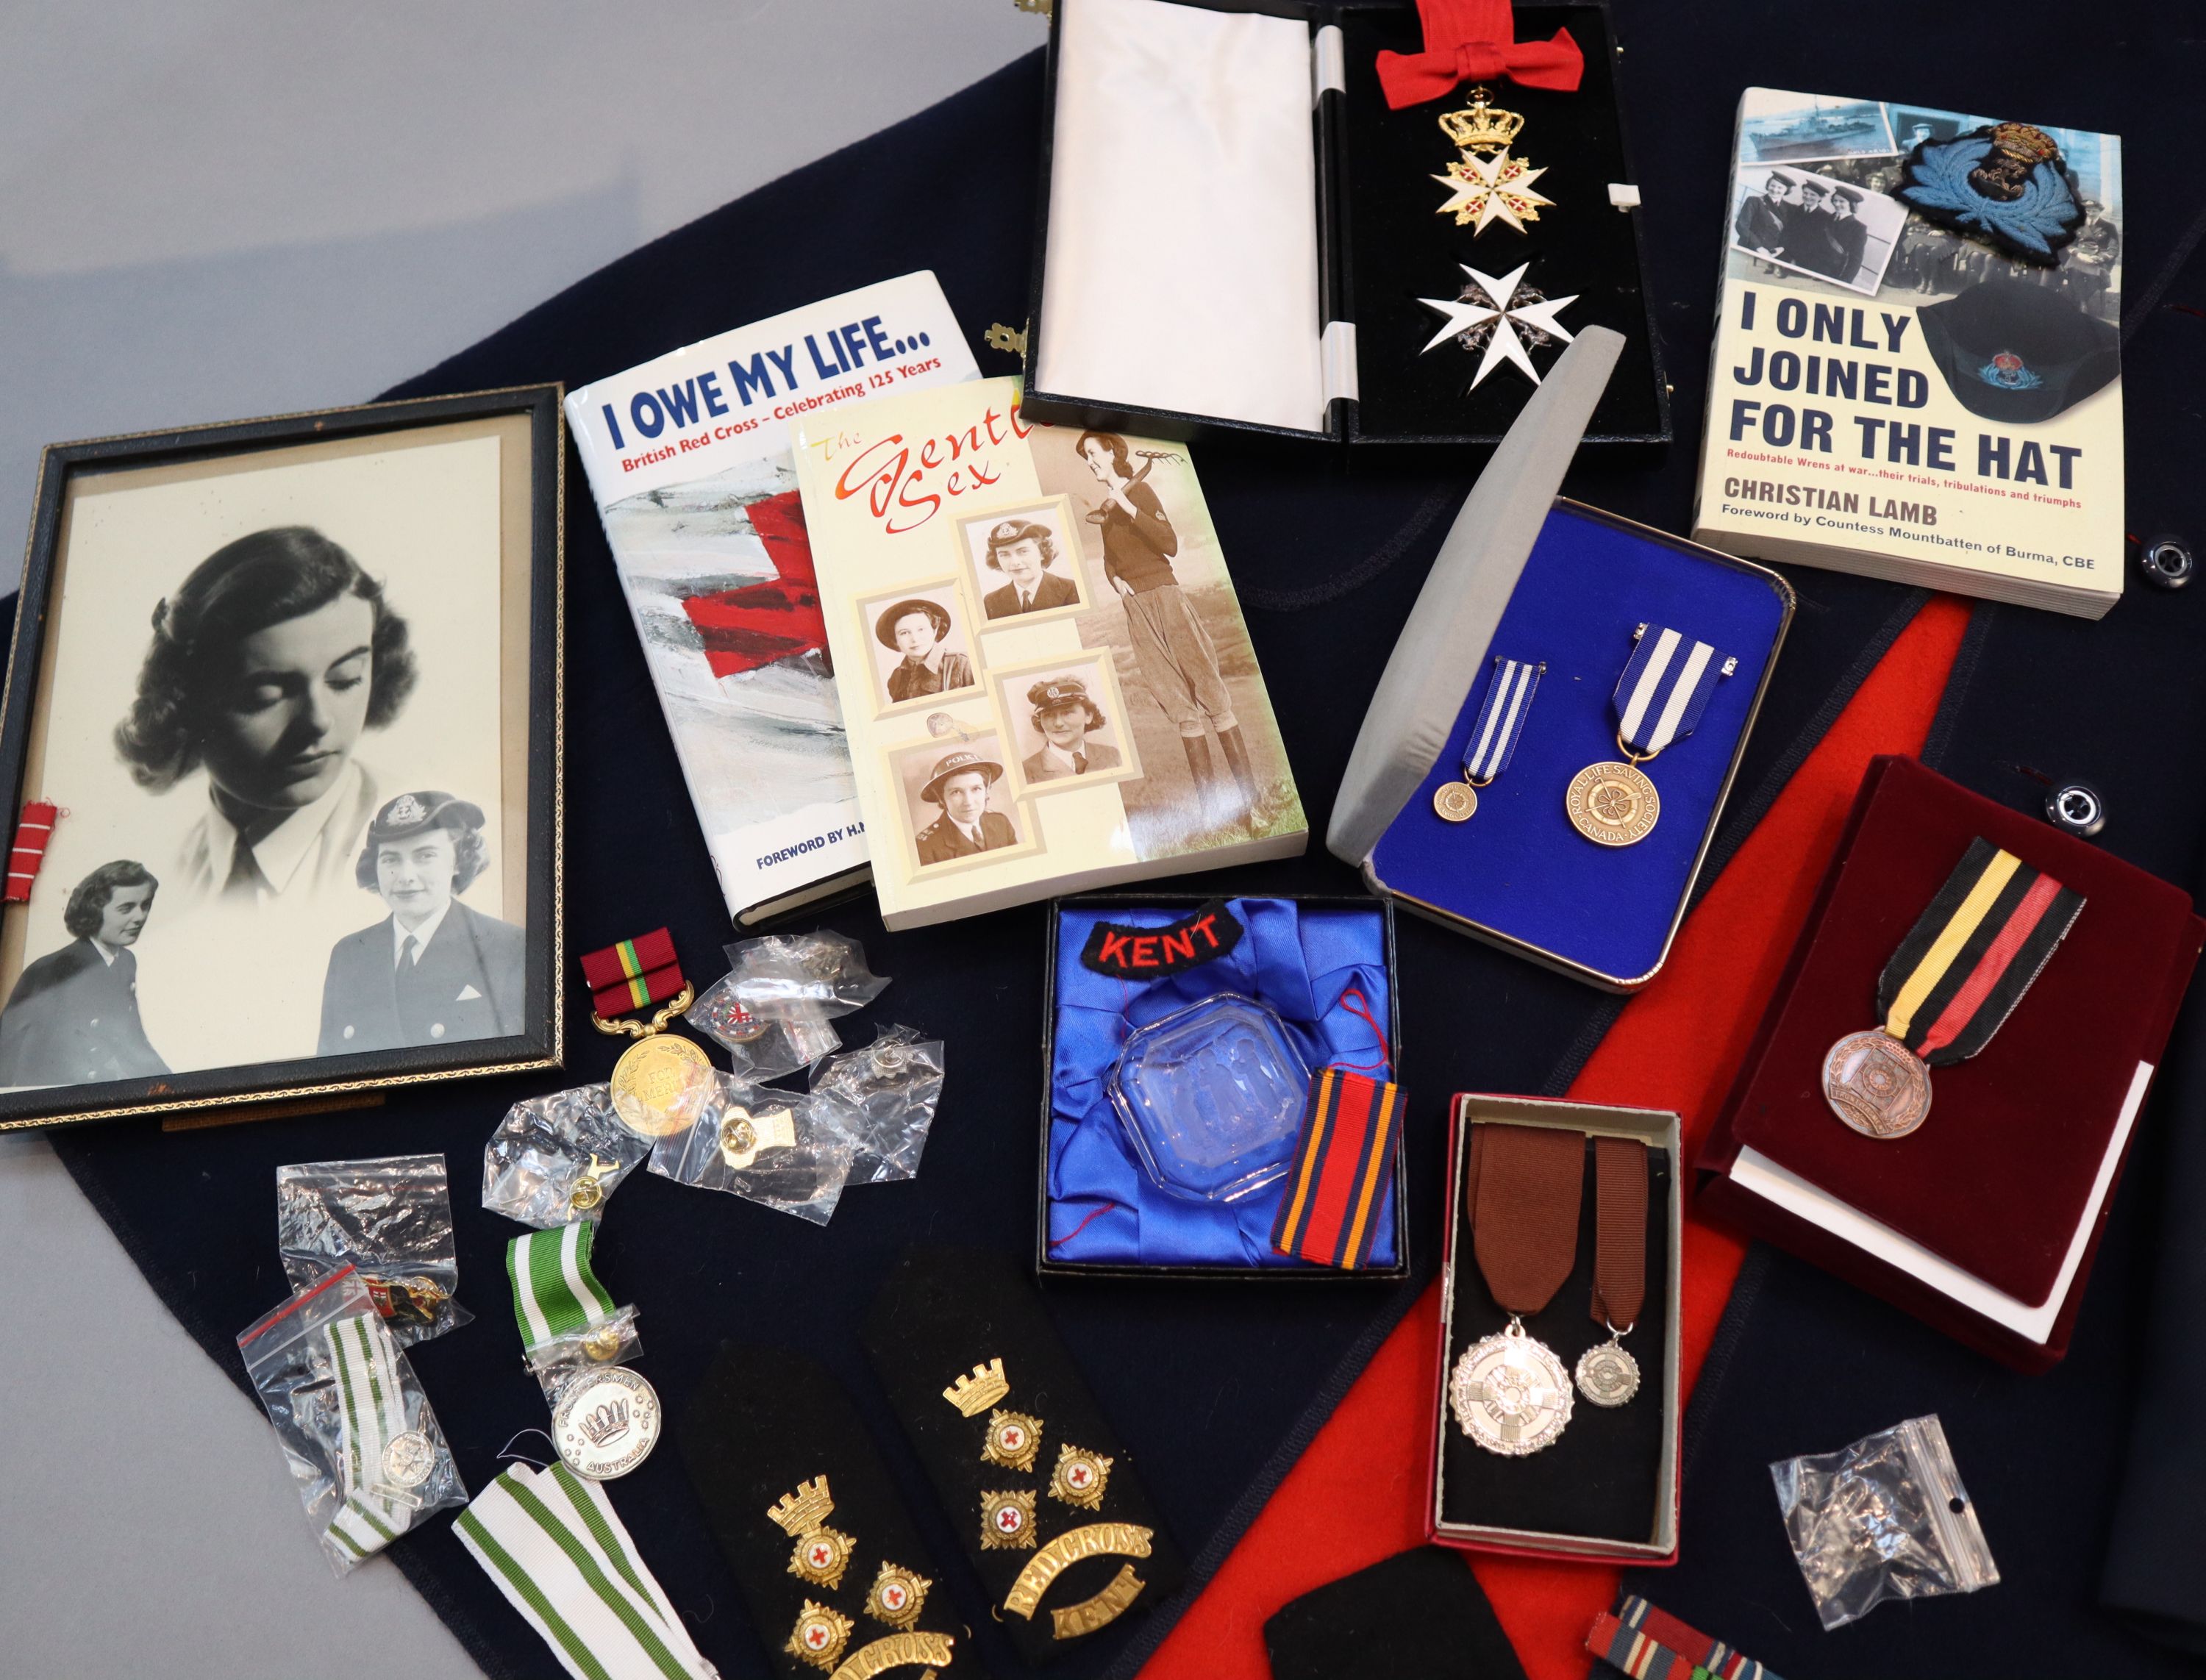 Lady Mountbattens Red Cross uniform, together with related awards, badges and other ephemera,